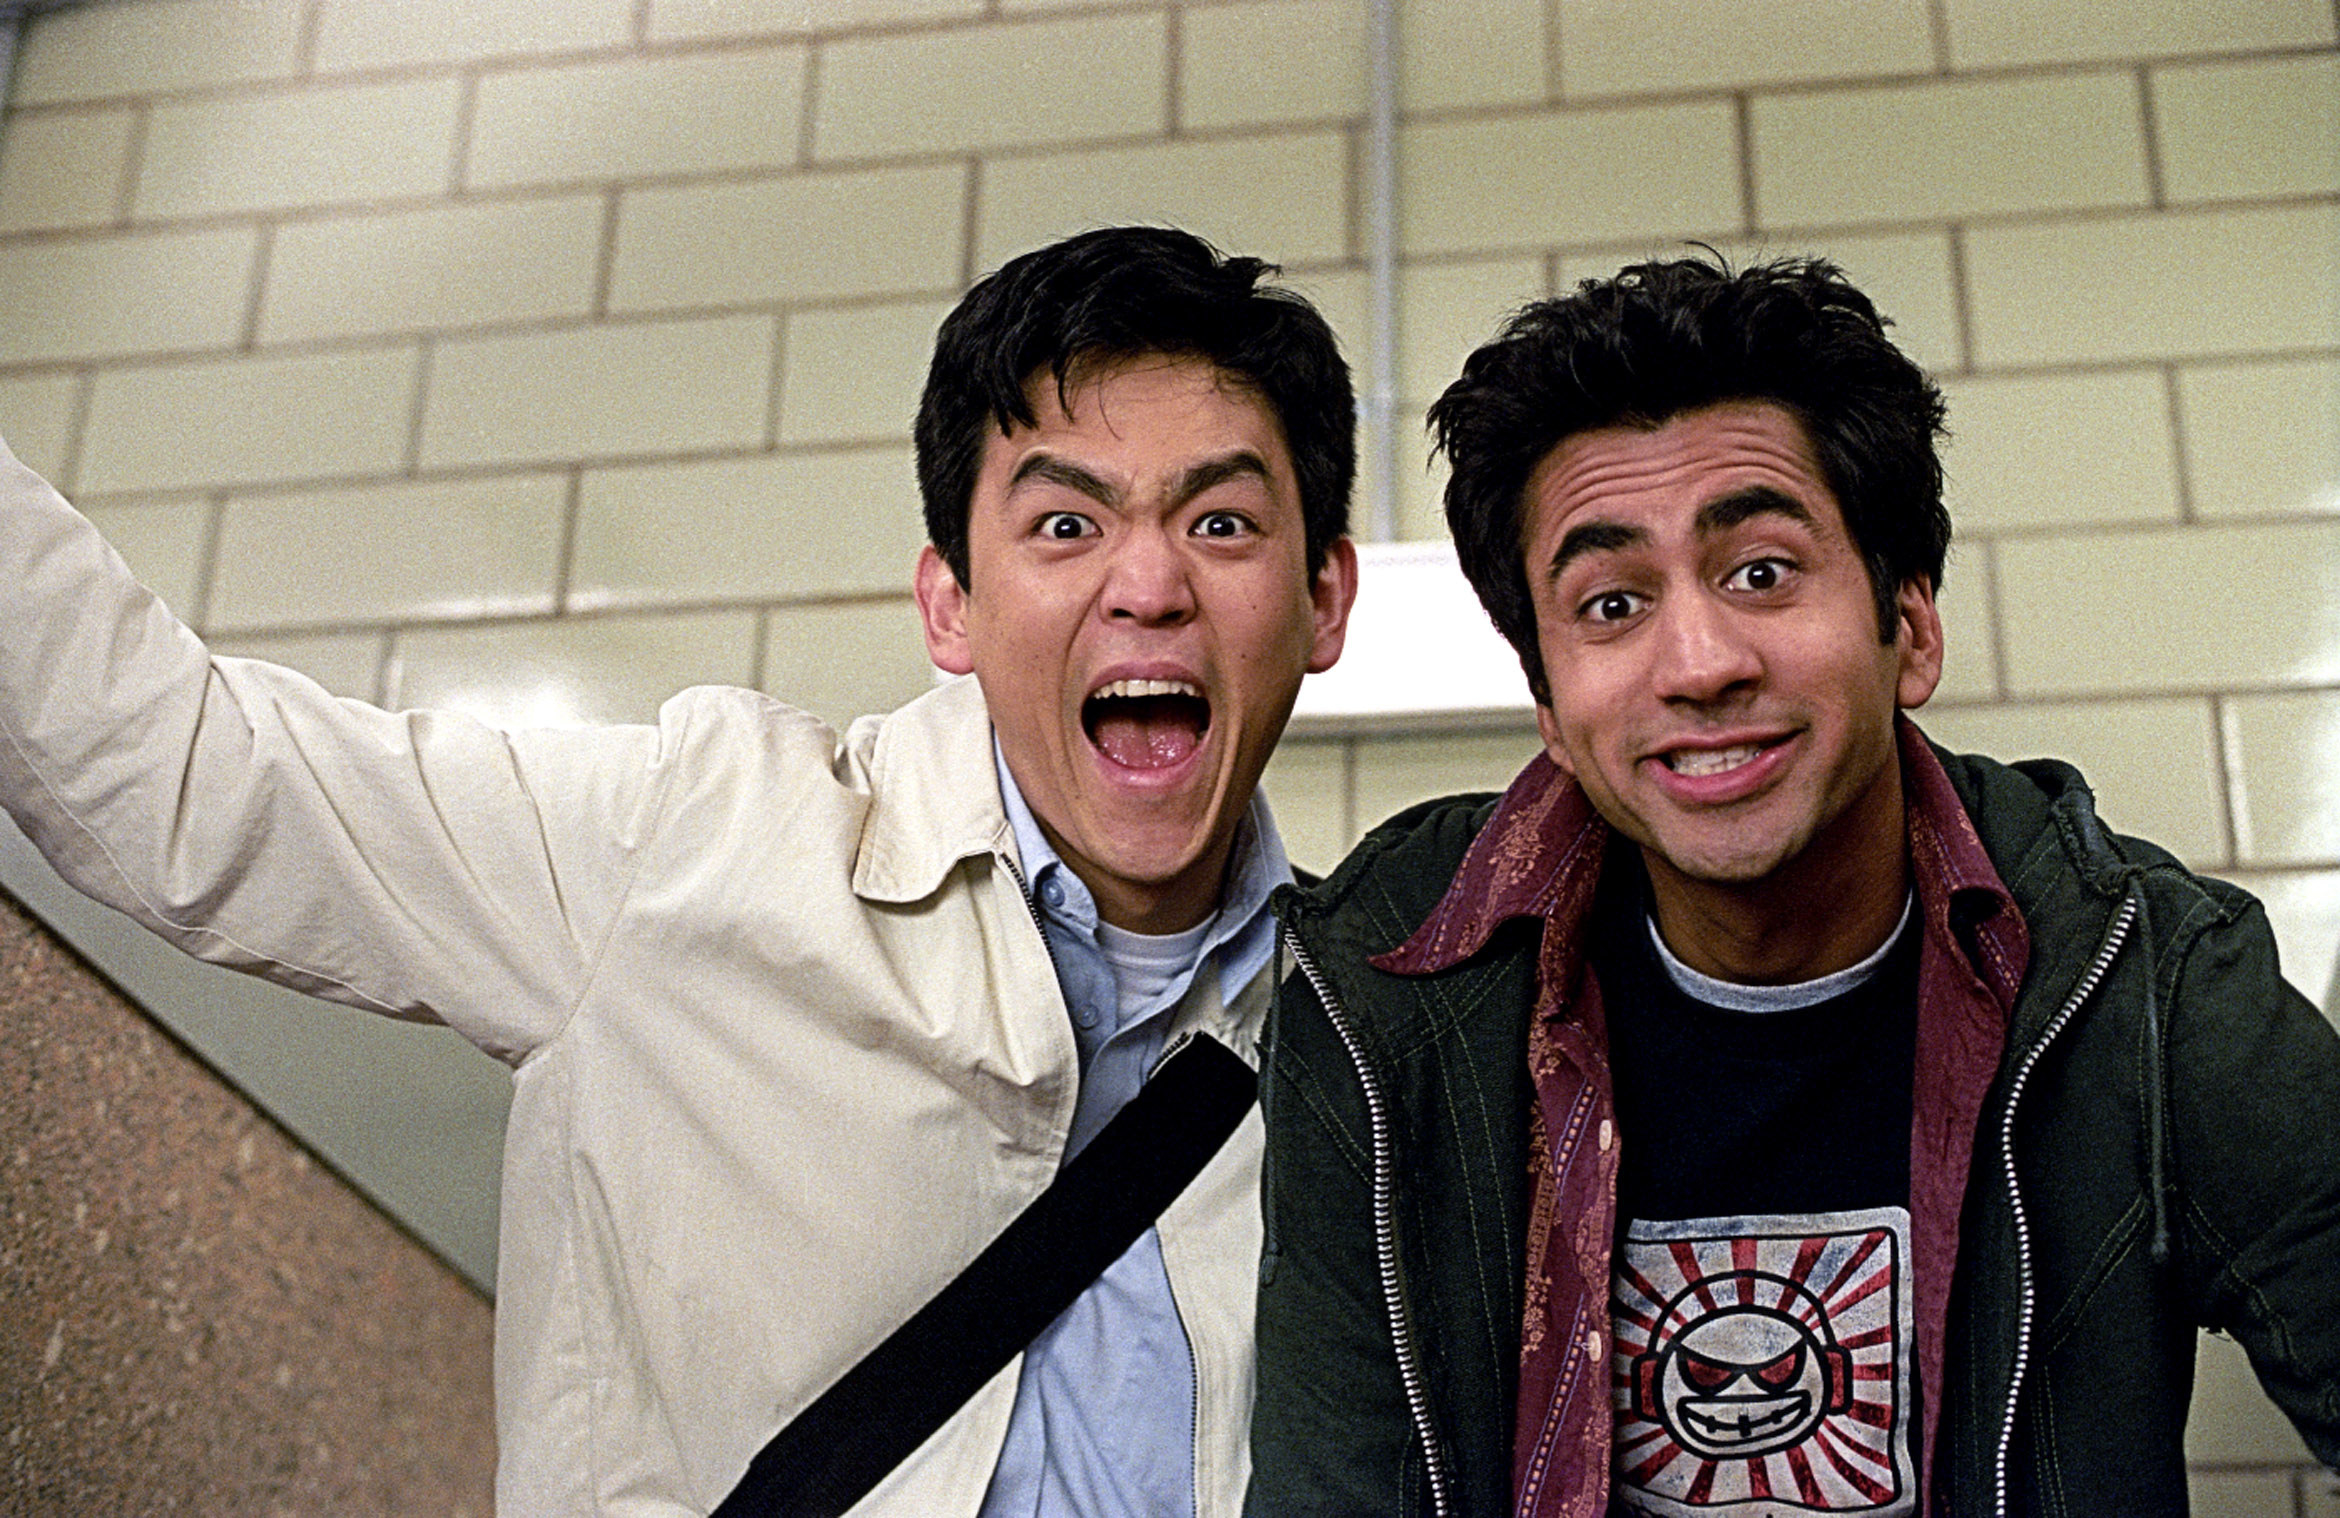 Harold and Kumar from their first movie